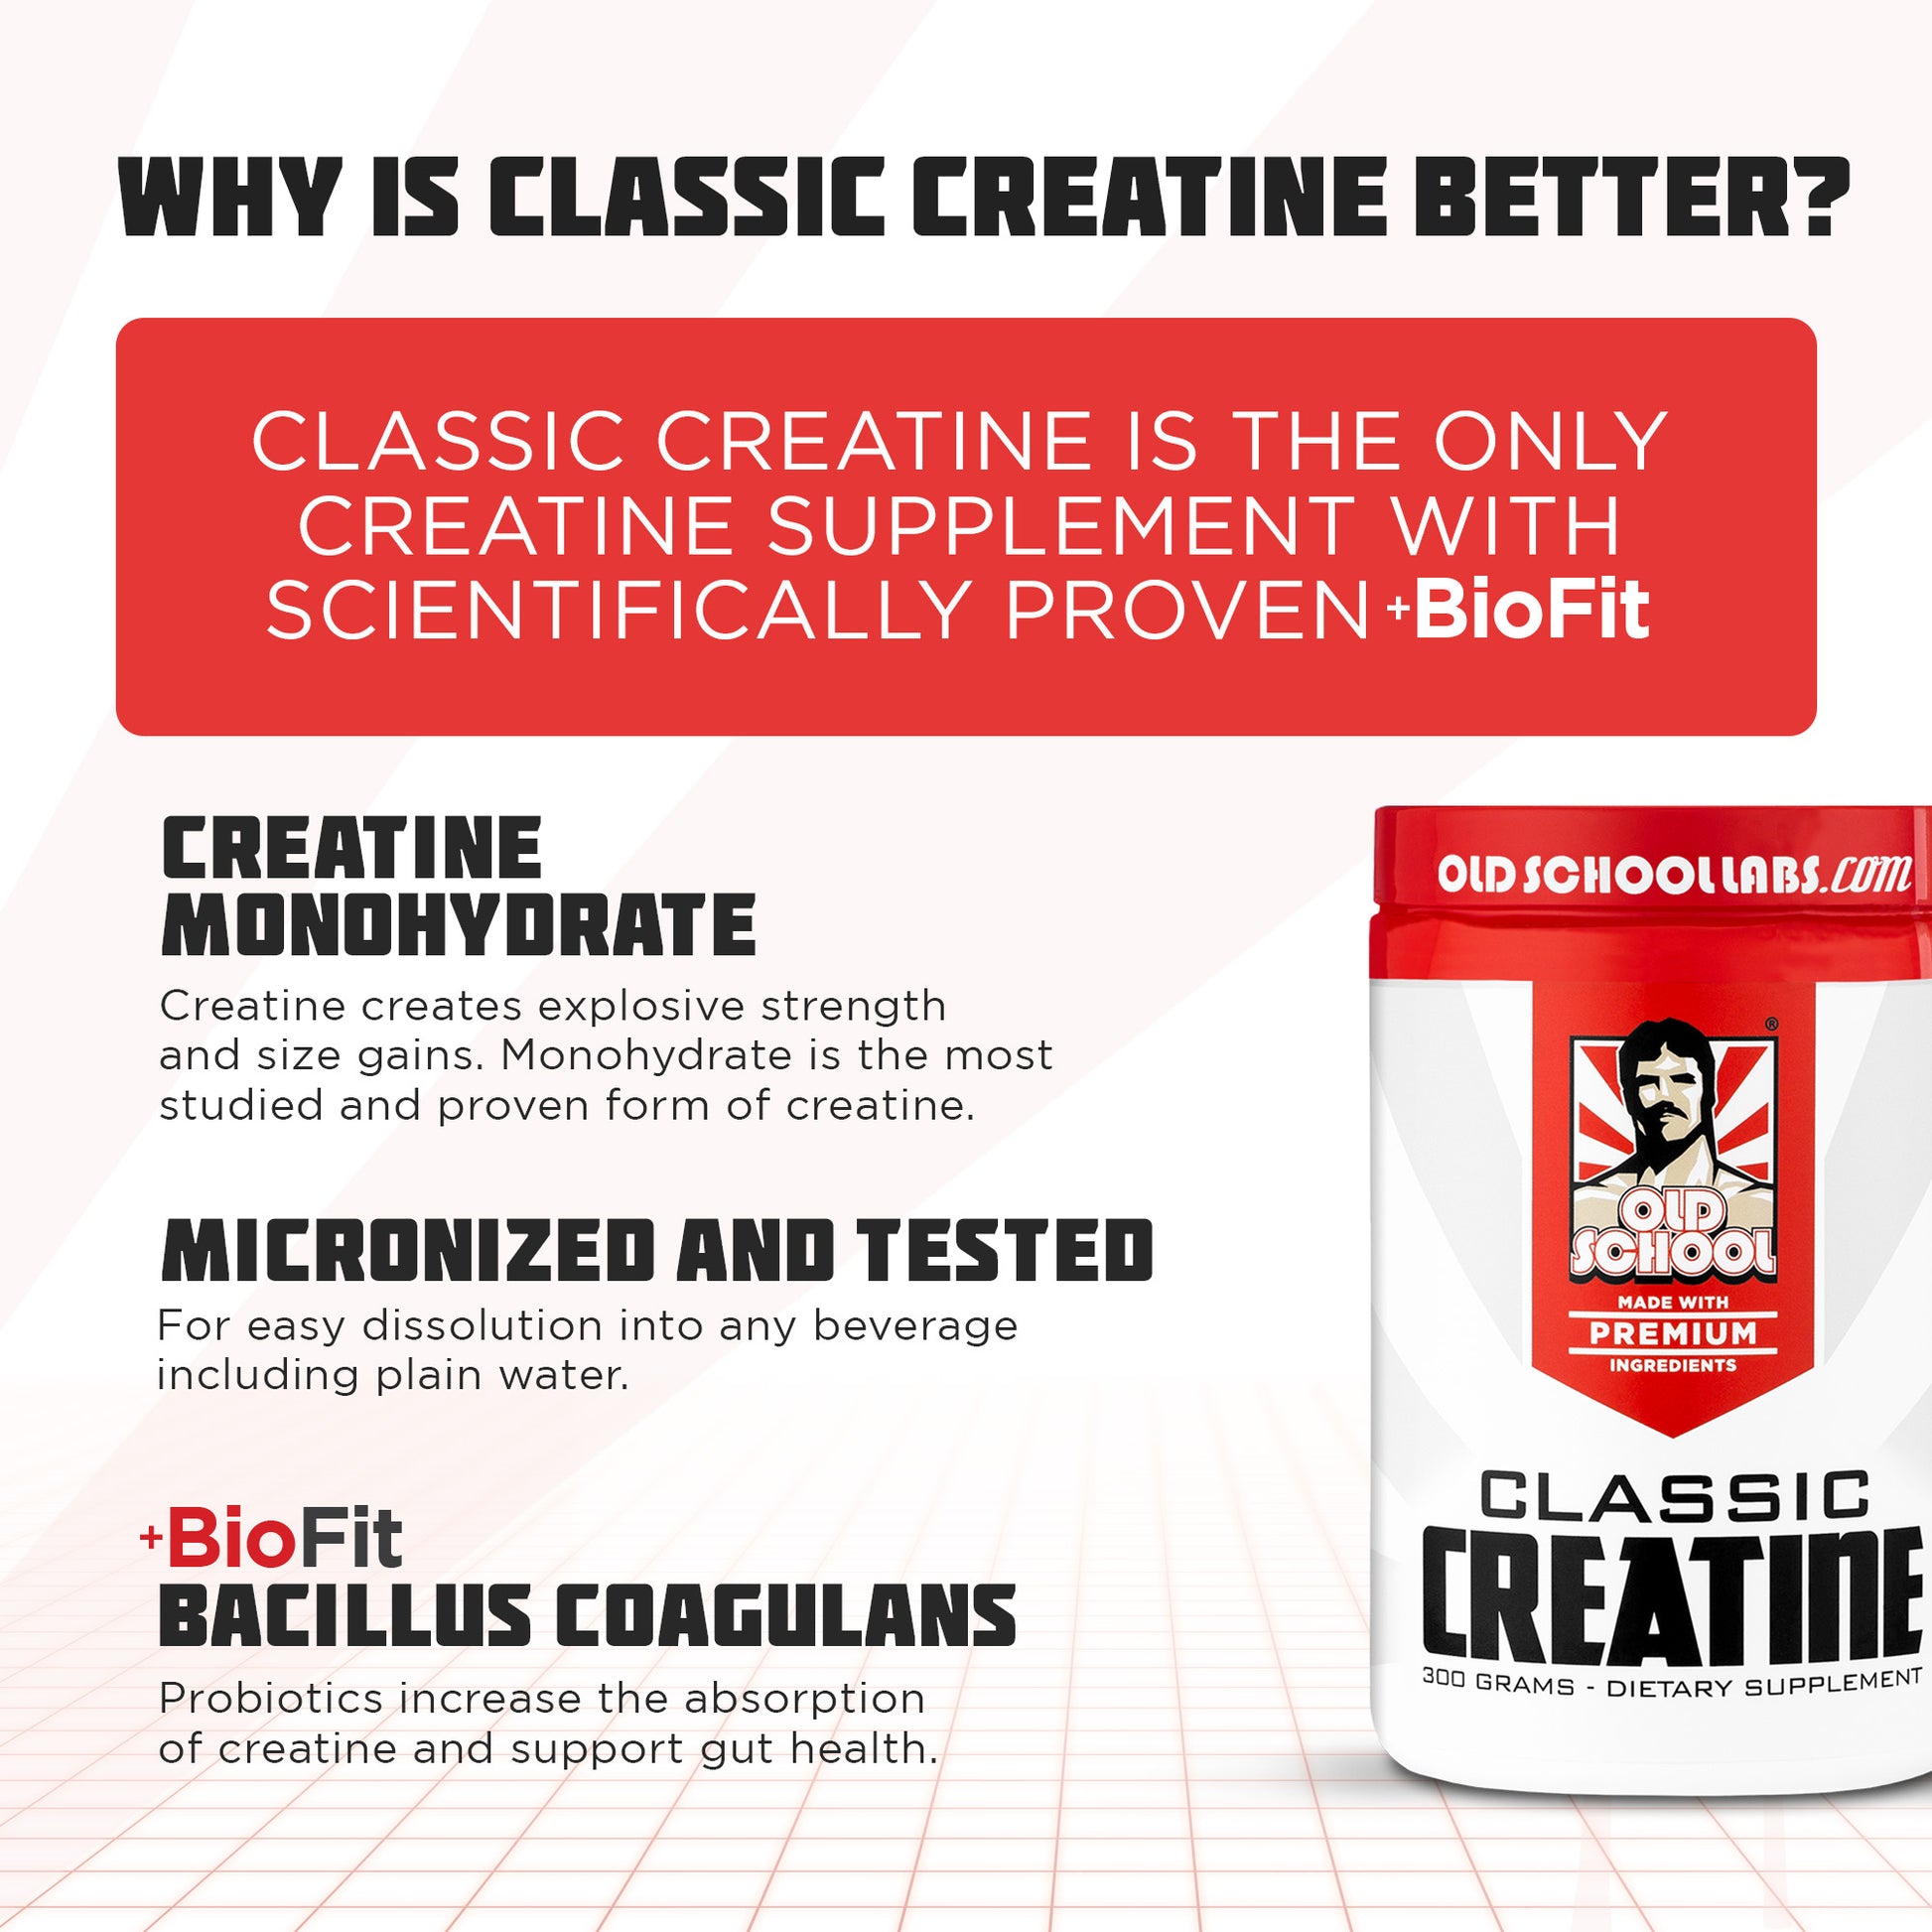 Why Classic Creatine is better